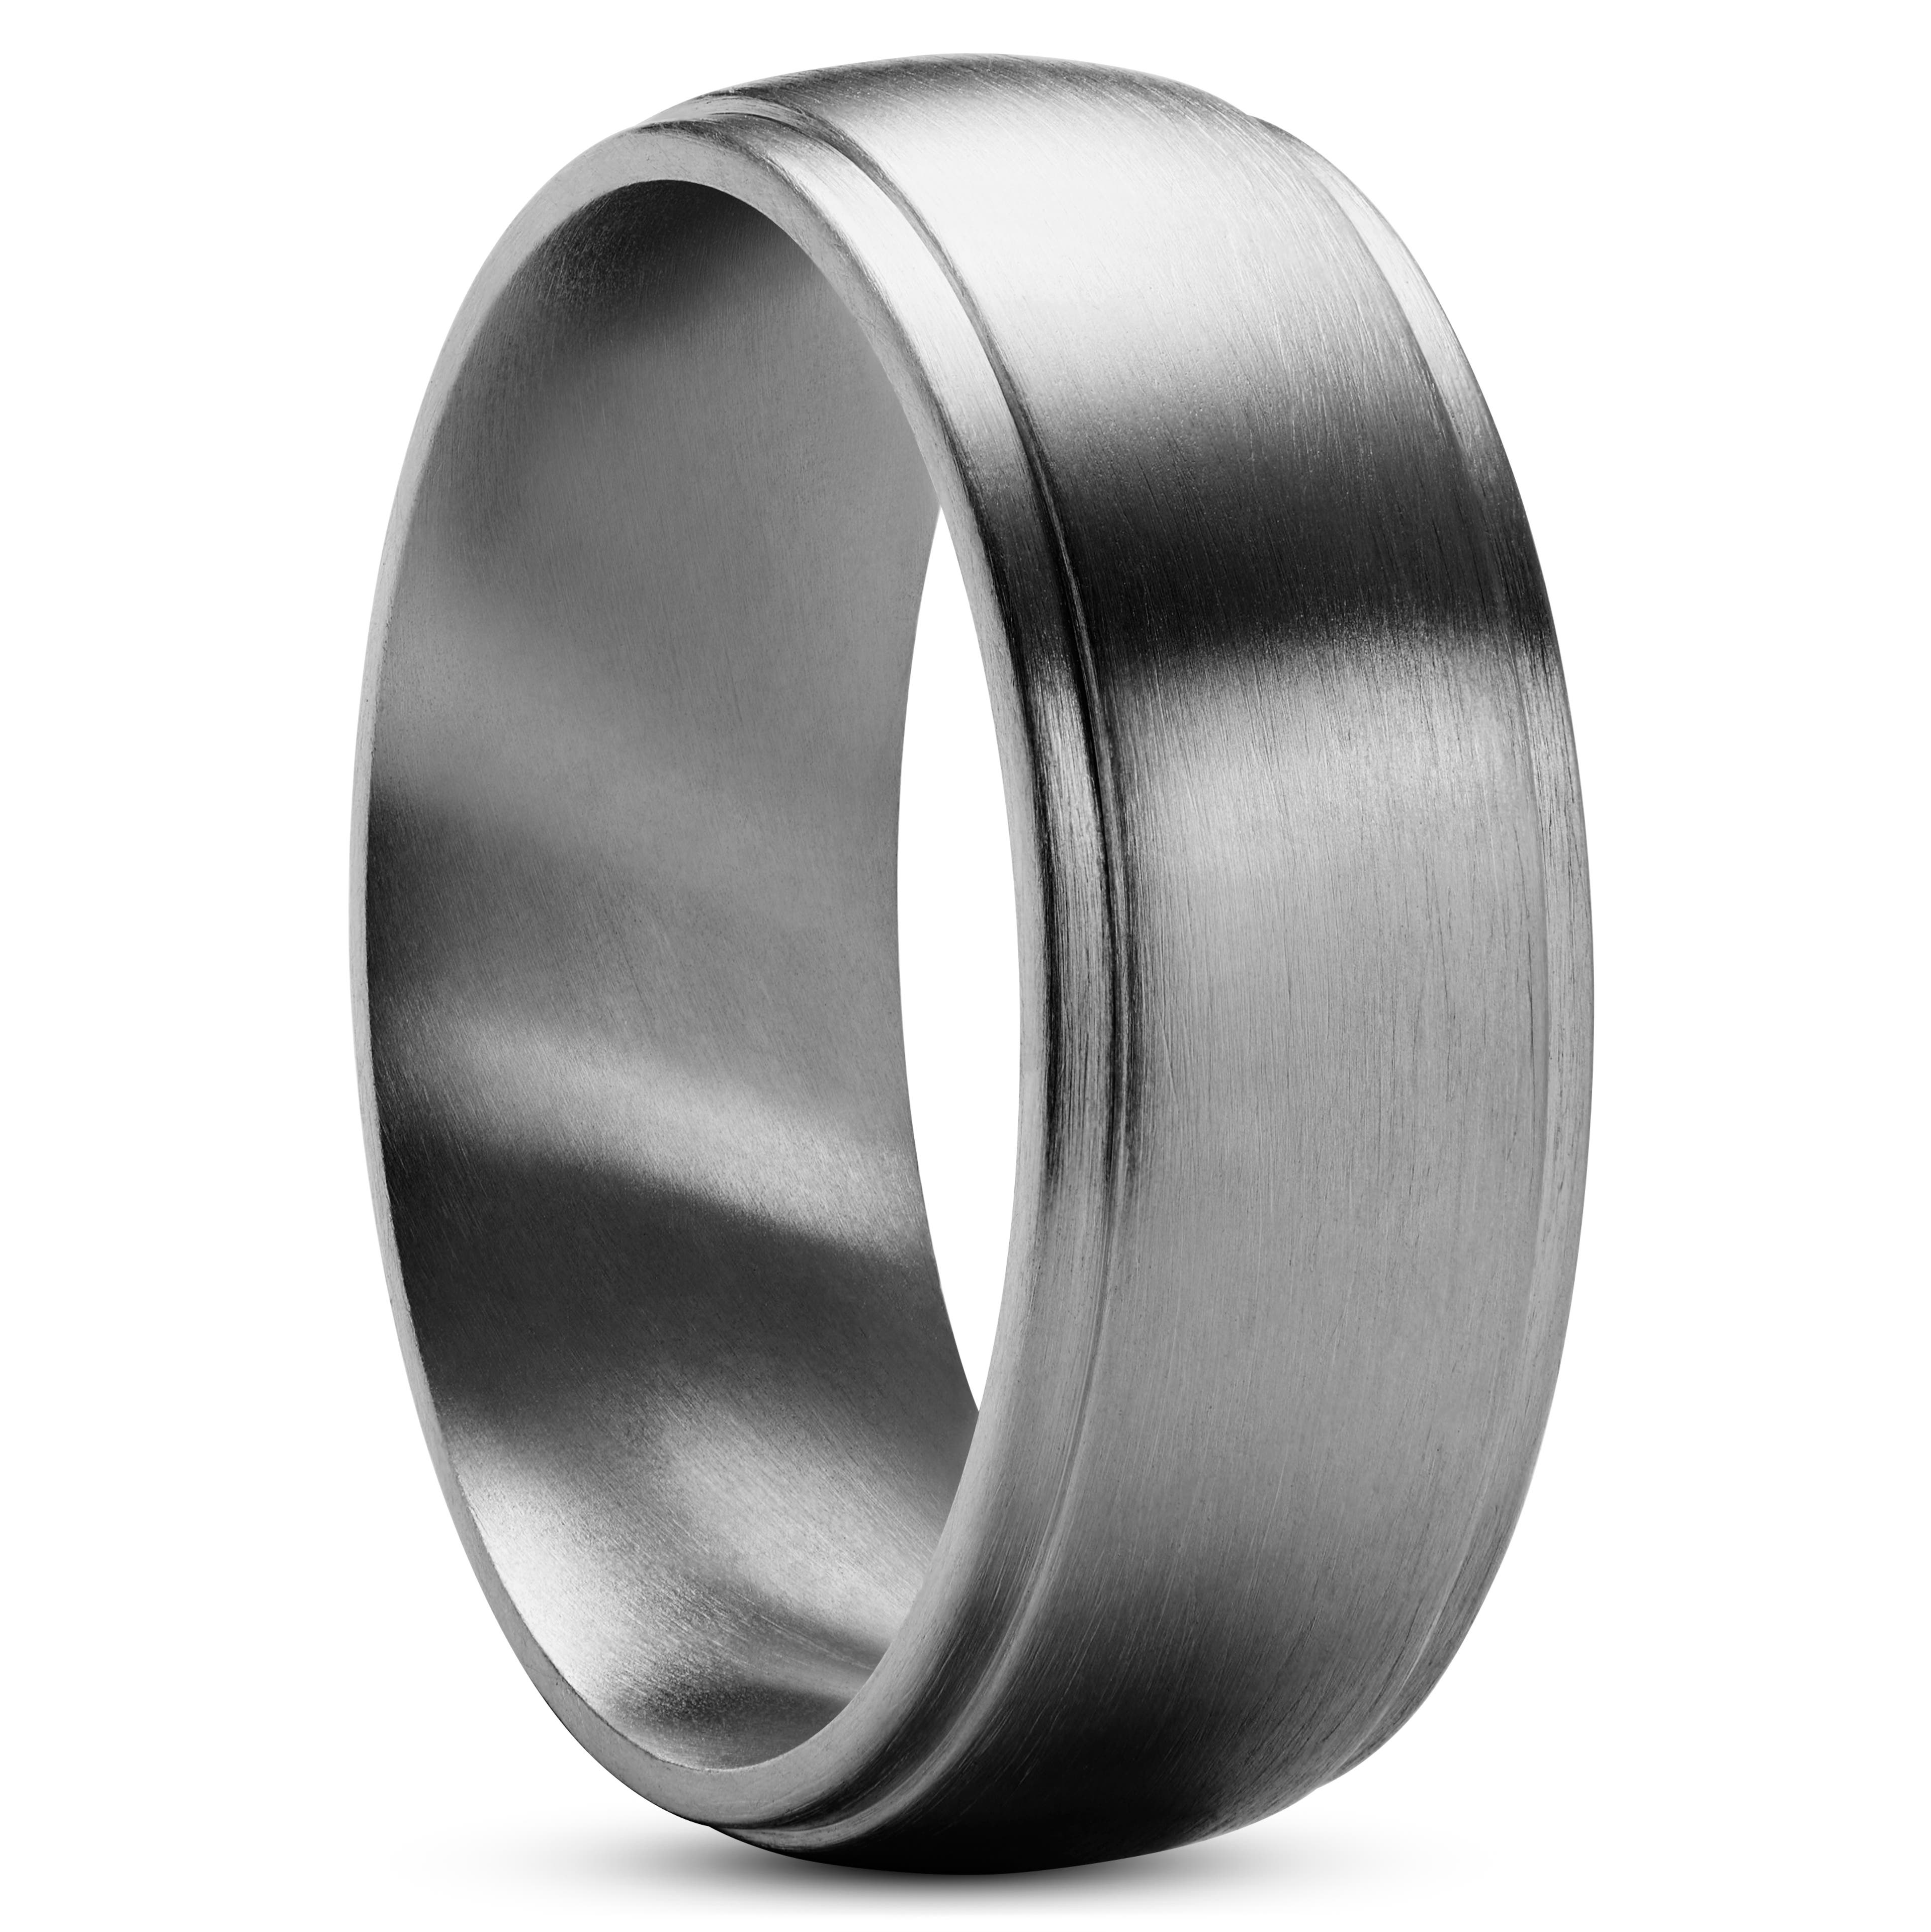 Aesop | 8 mm Silver-Tone Titanium With Silver-Tone Center Ring